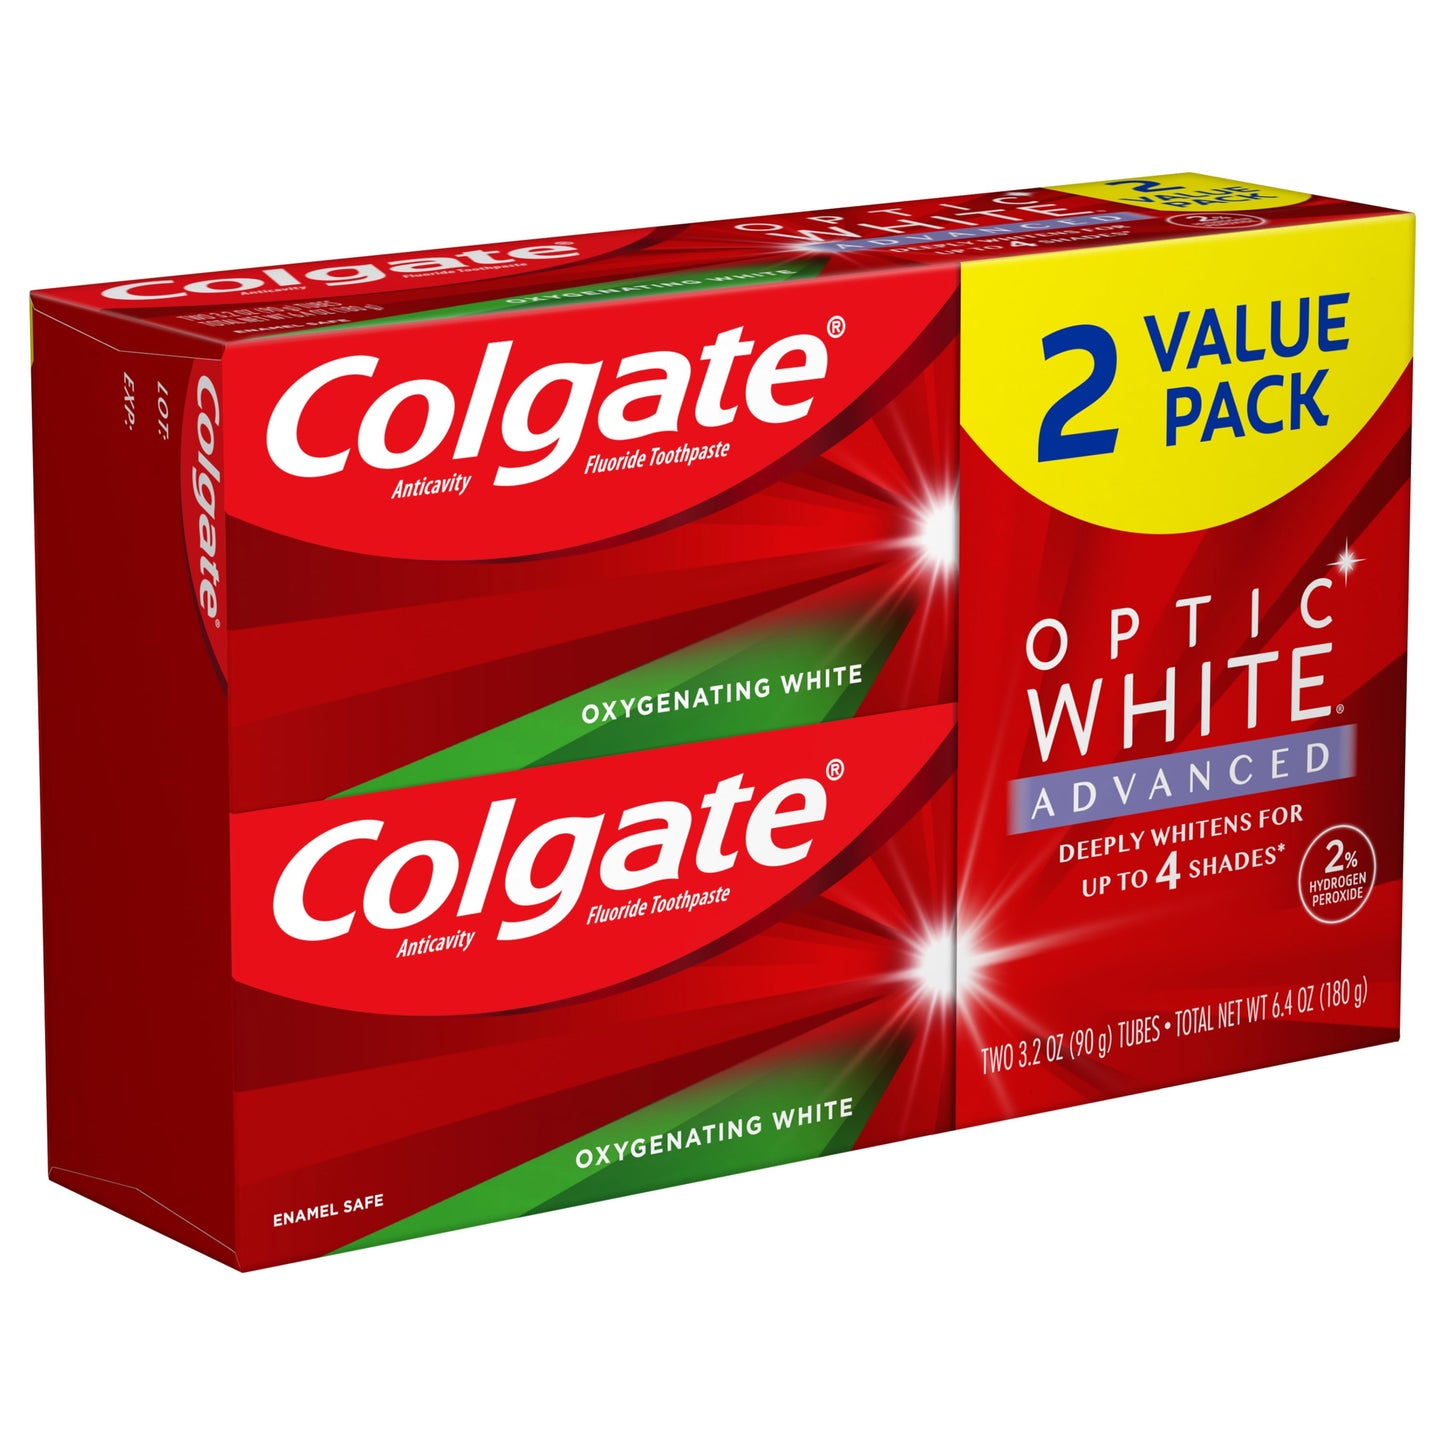 Colgate Optic White Advanced Hydrogen Peroxide Toothpaste, Oxygenating White, 2 Pack, 3.2 oz